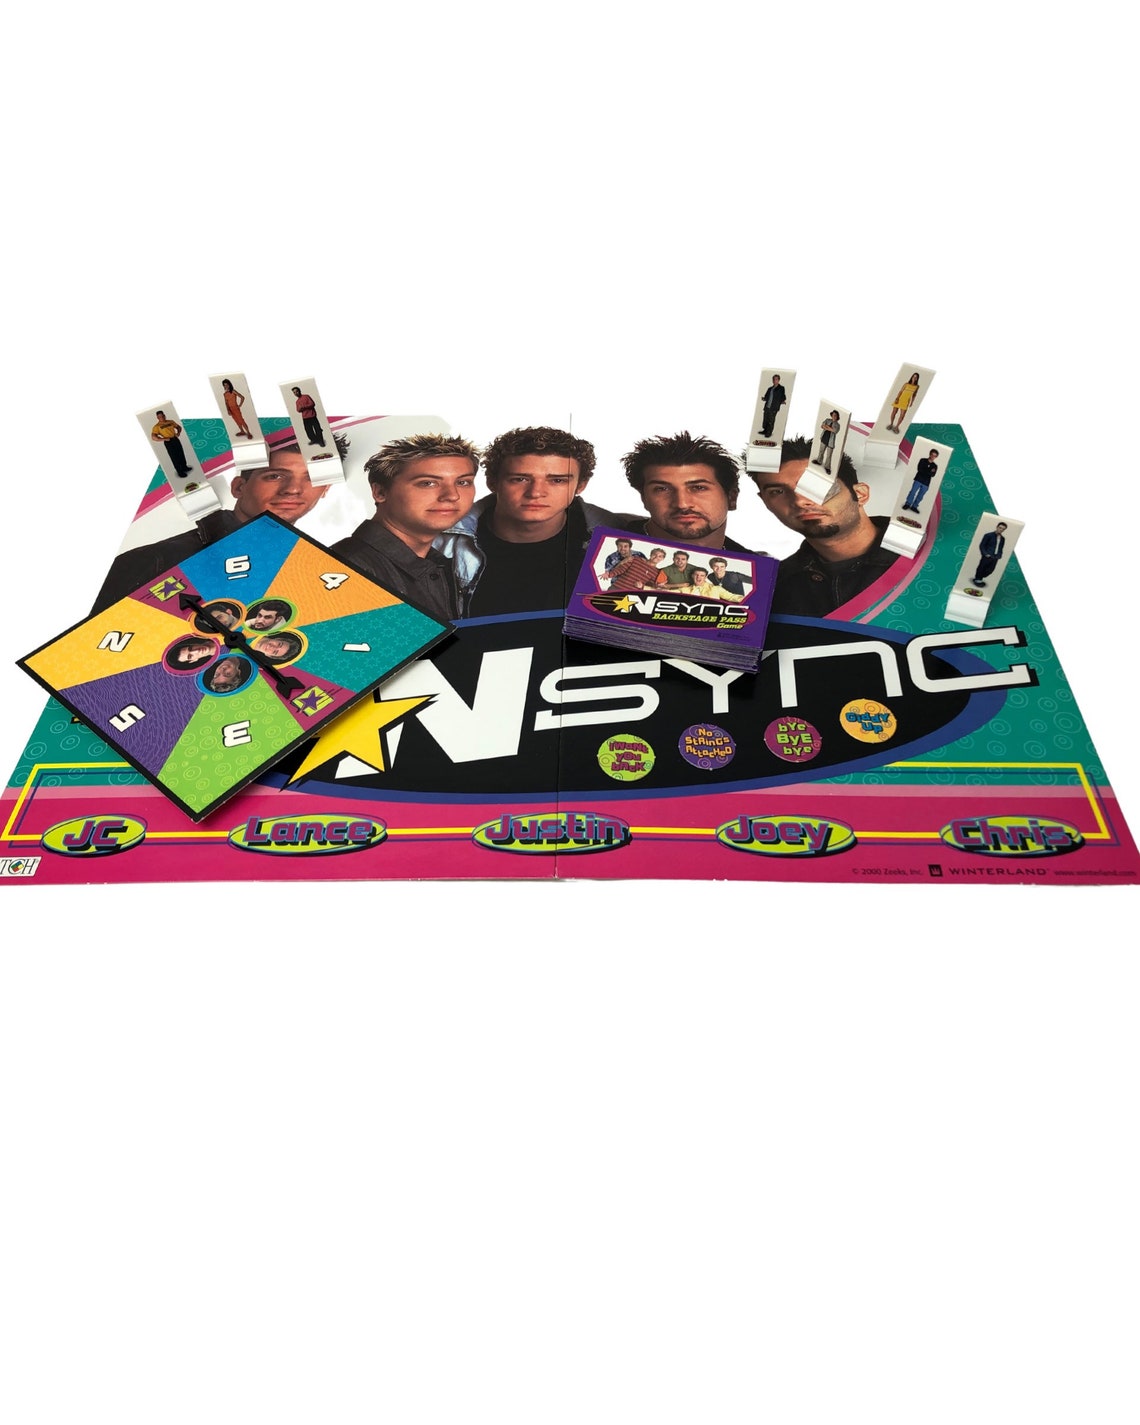 nsync backstage pass game unopened